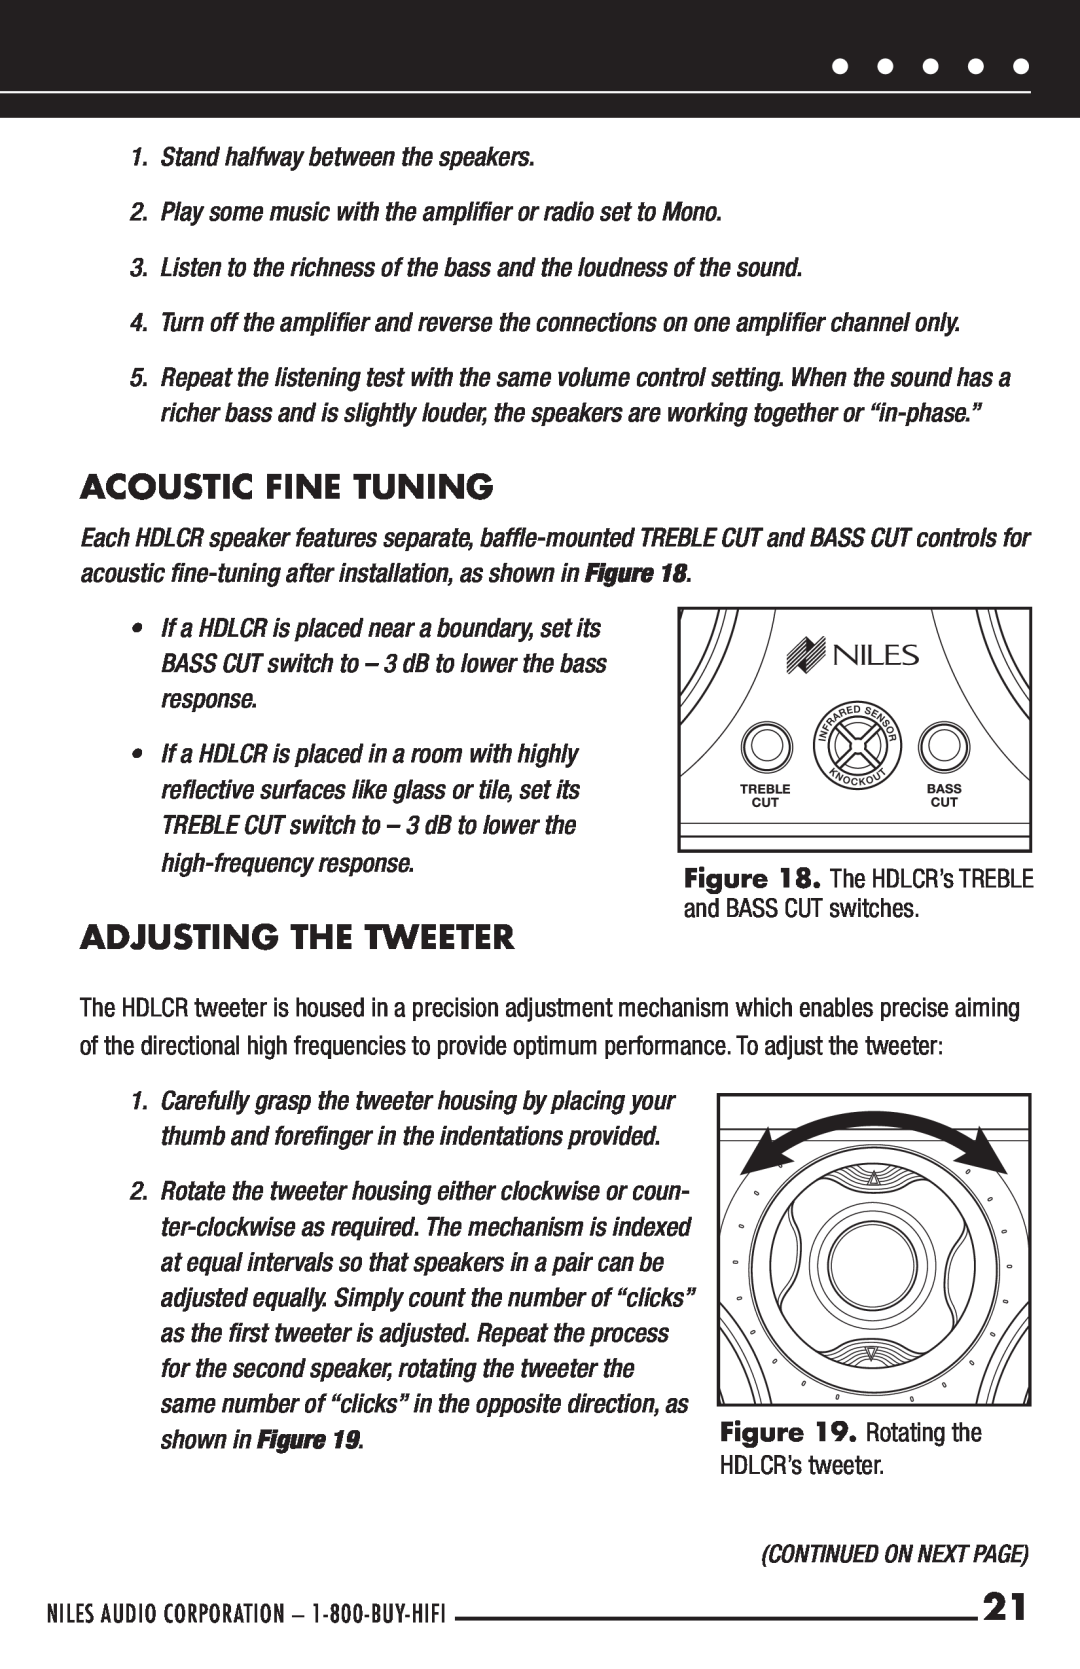 Niles Audio manual Acoustic Fine Tuning, Adjusting The Tweeter, Rotating the HDLCR’s tweeter 